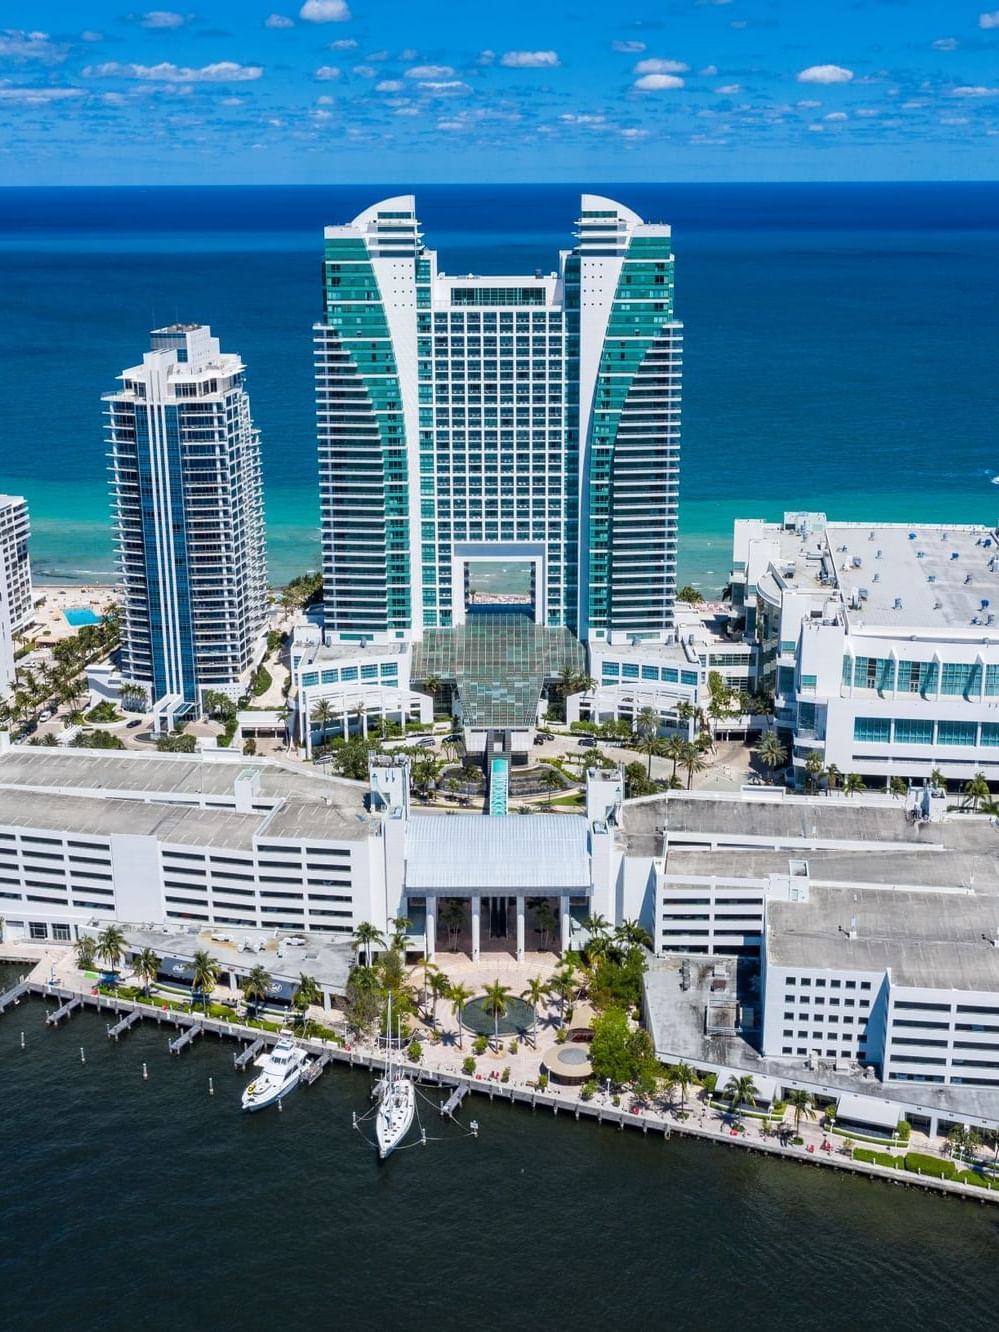 Aerial view of The Diplomat Resort with the ocean